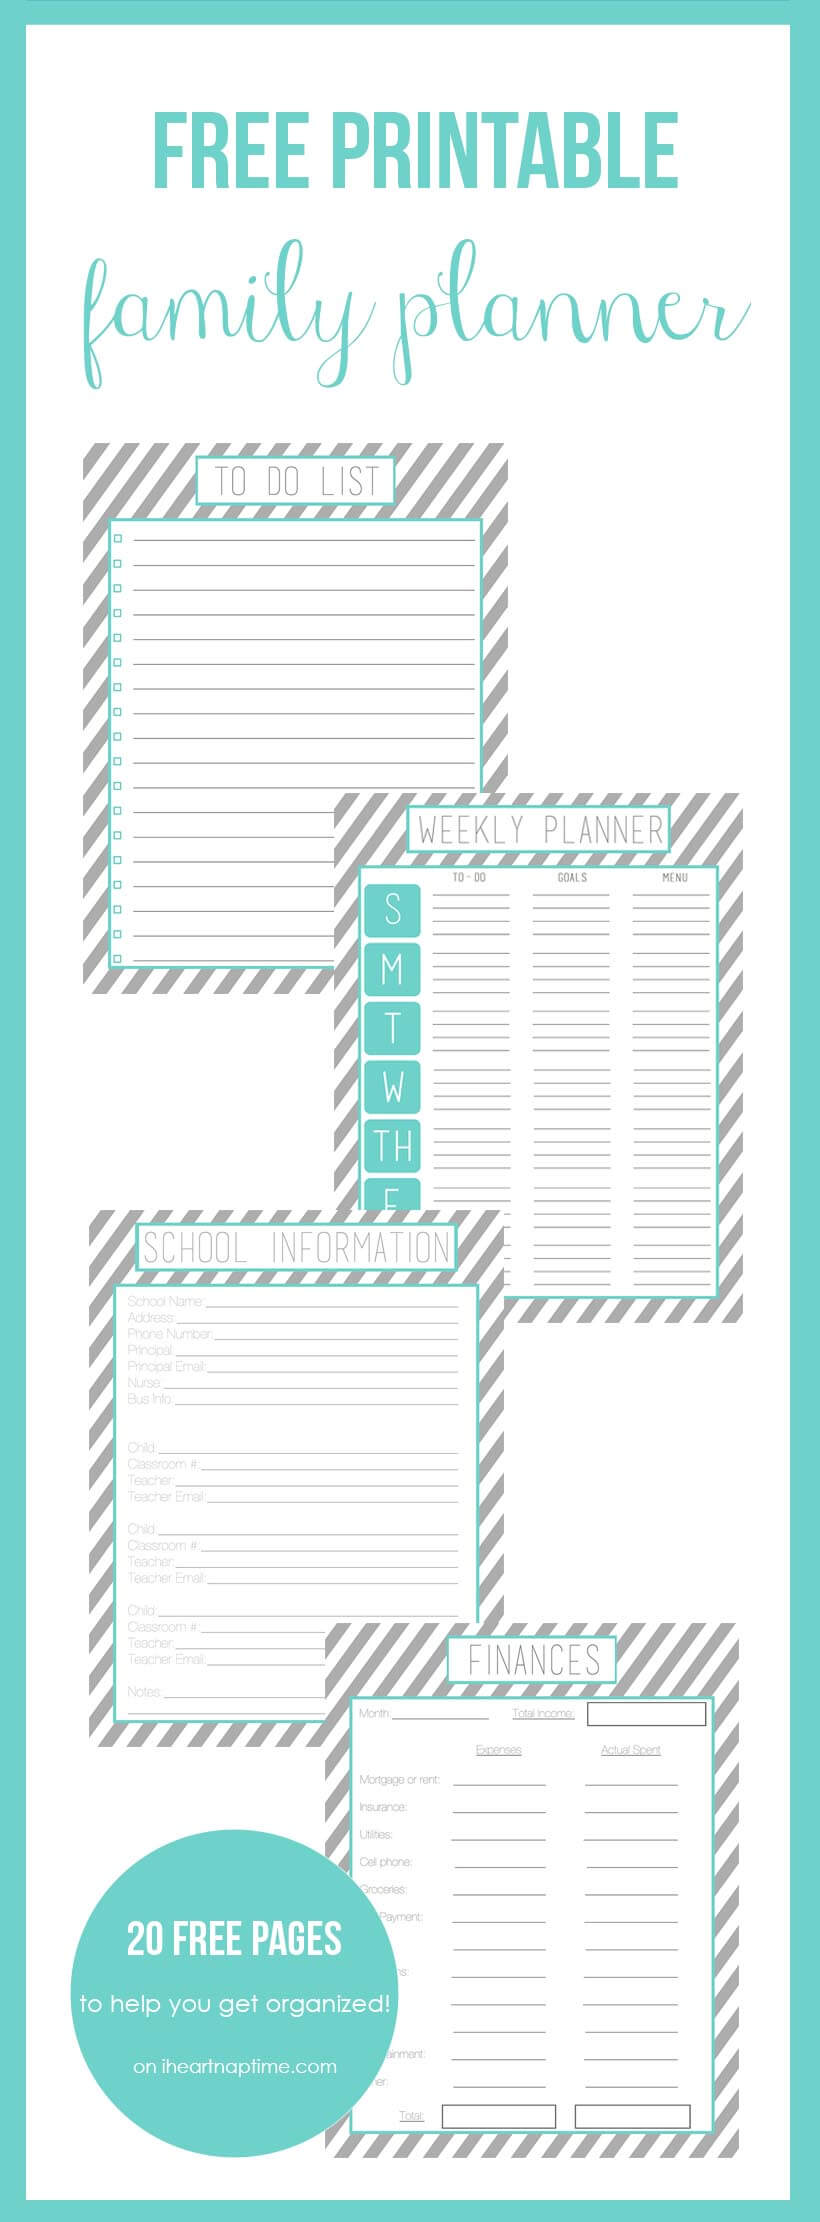 Free printable family planner on iheartnaptime.com -over 20 free printables to help you get organized! 